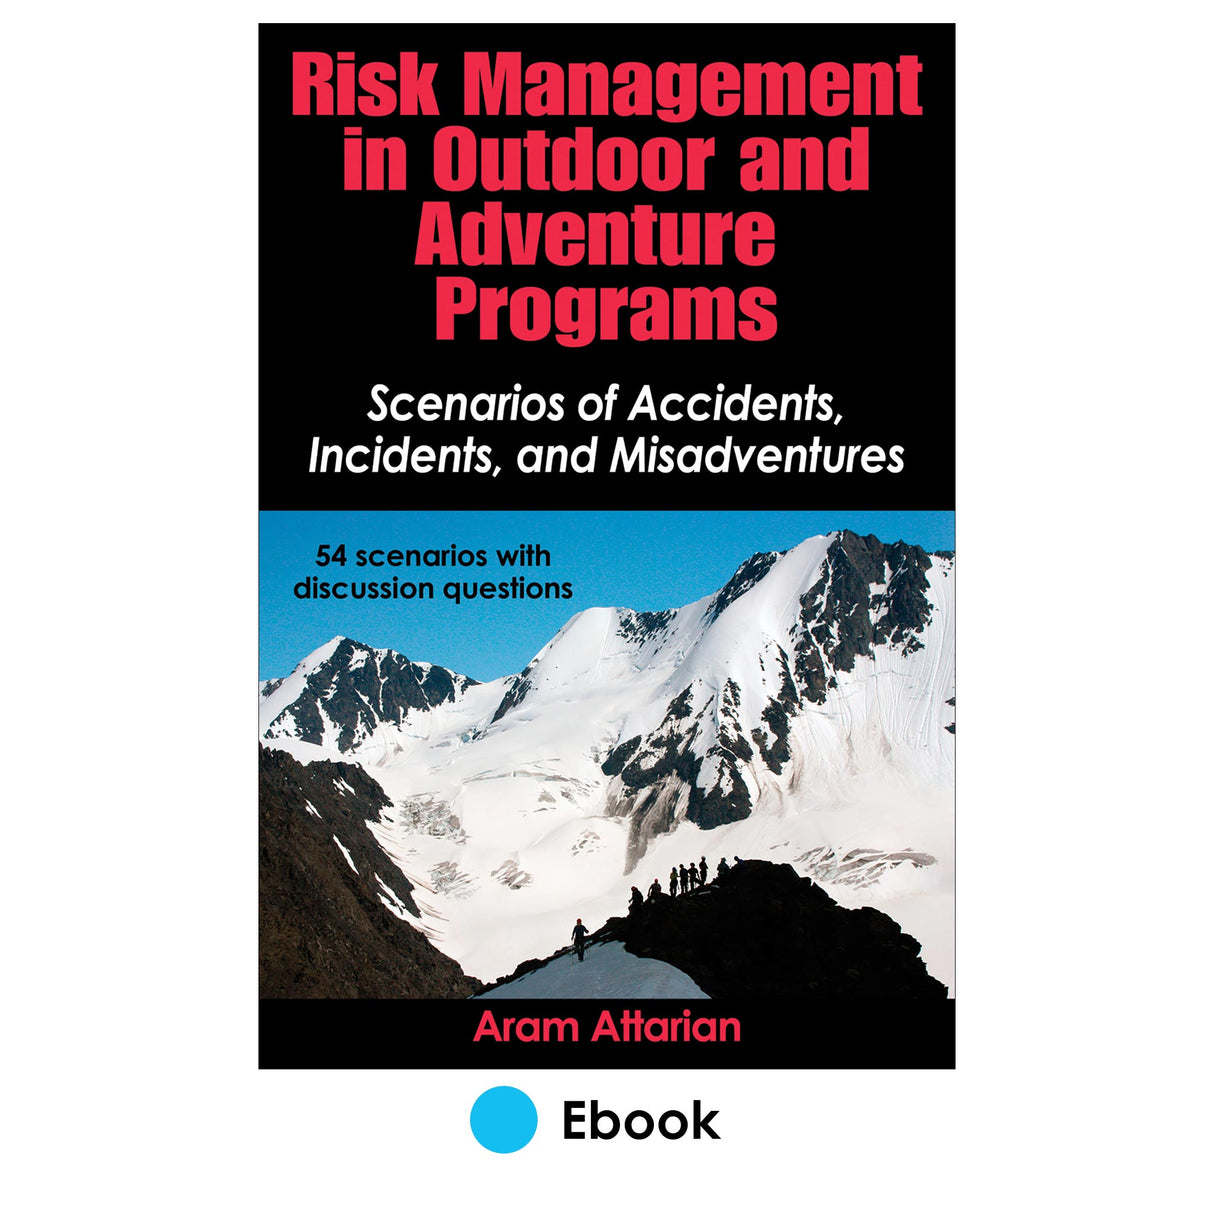 Risk Management in Outdoor and Adventure Programs PDF